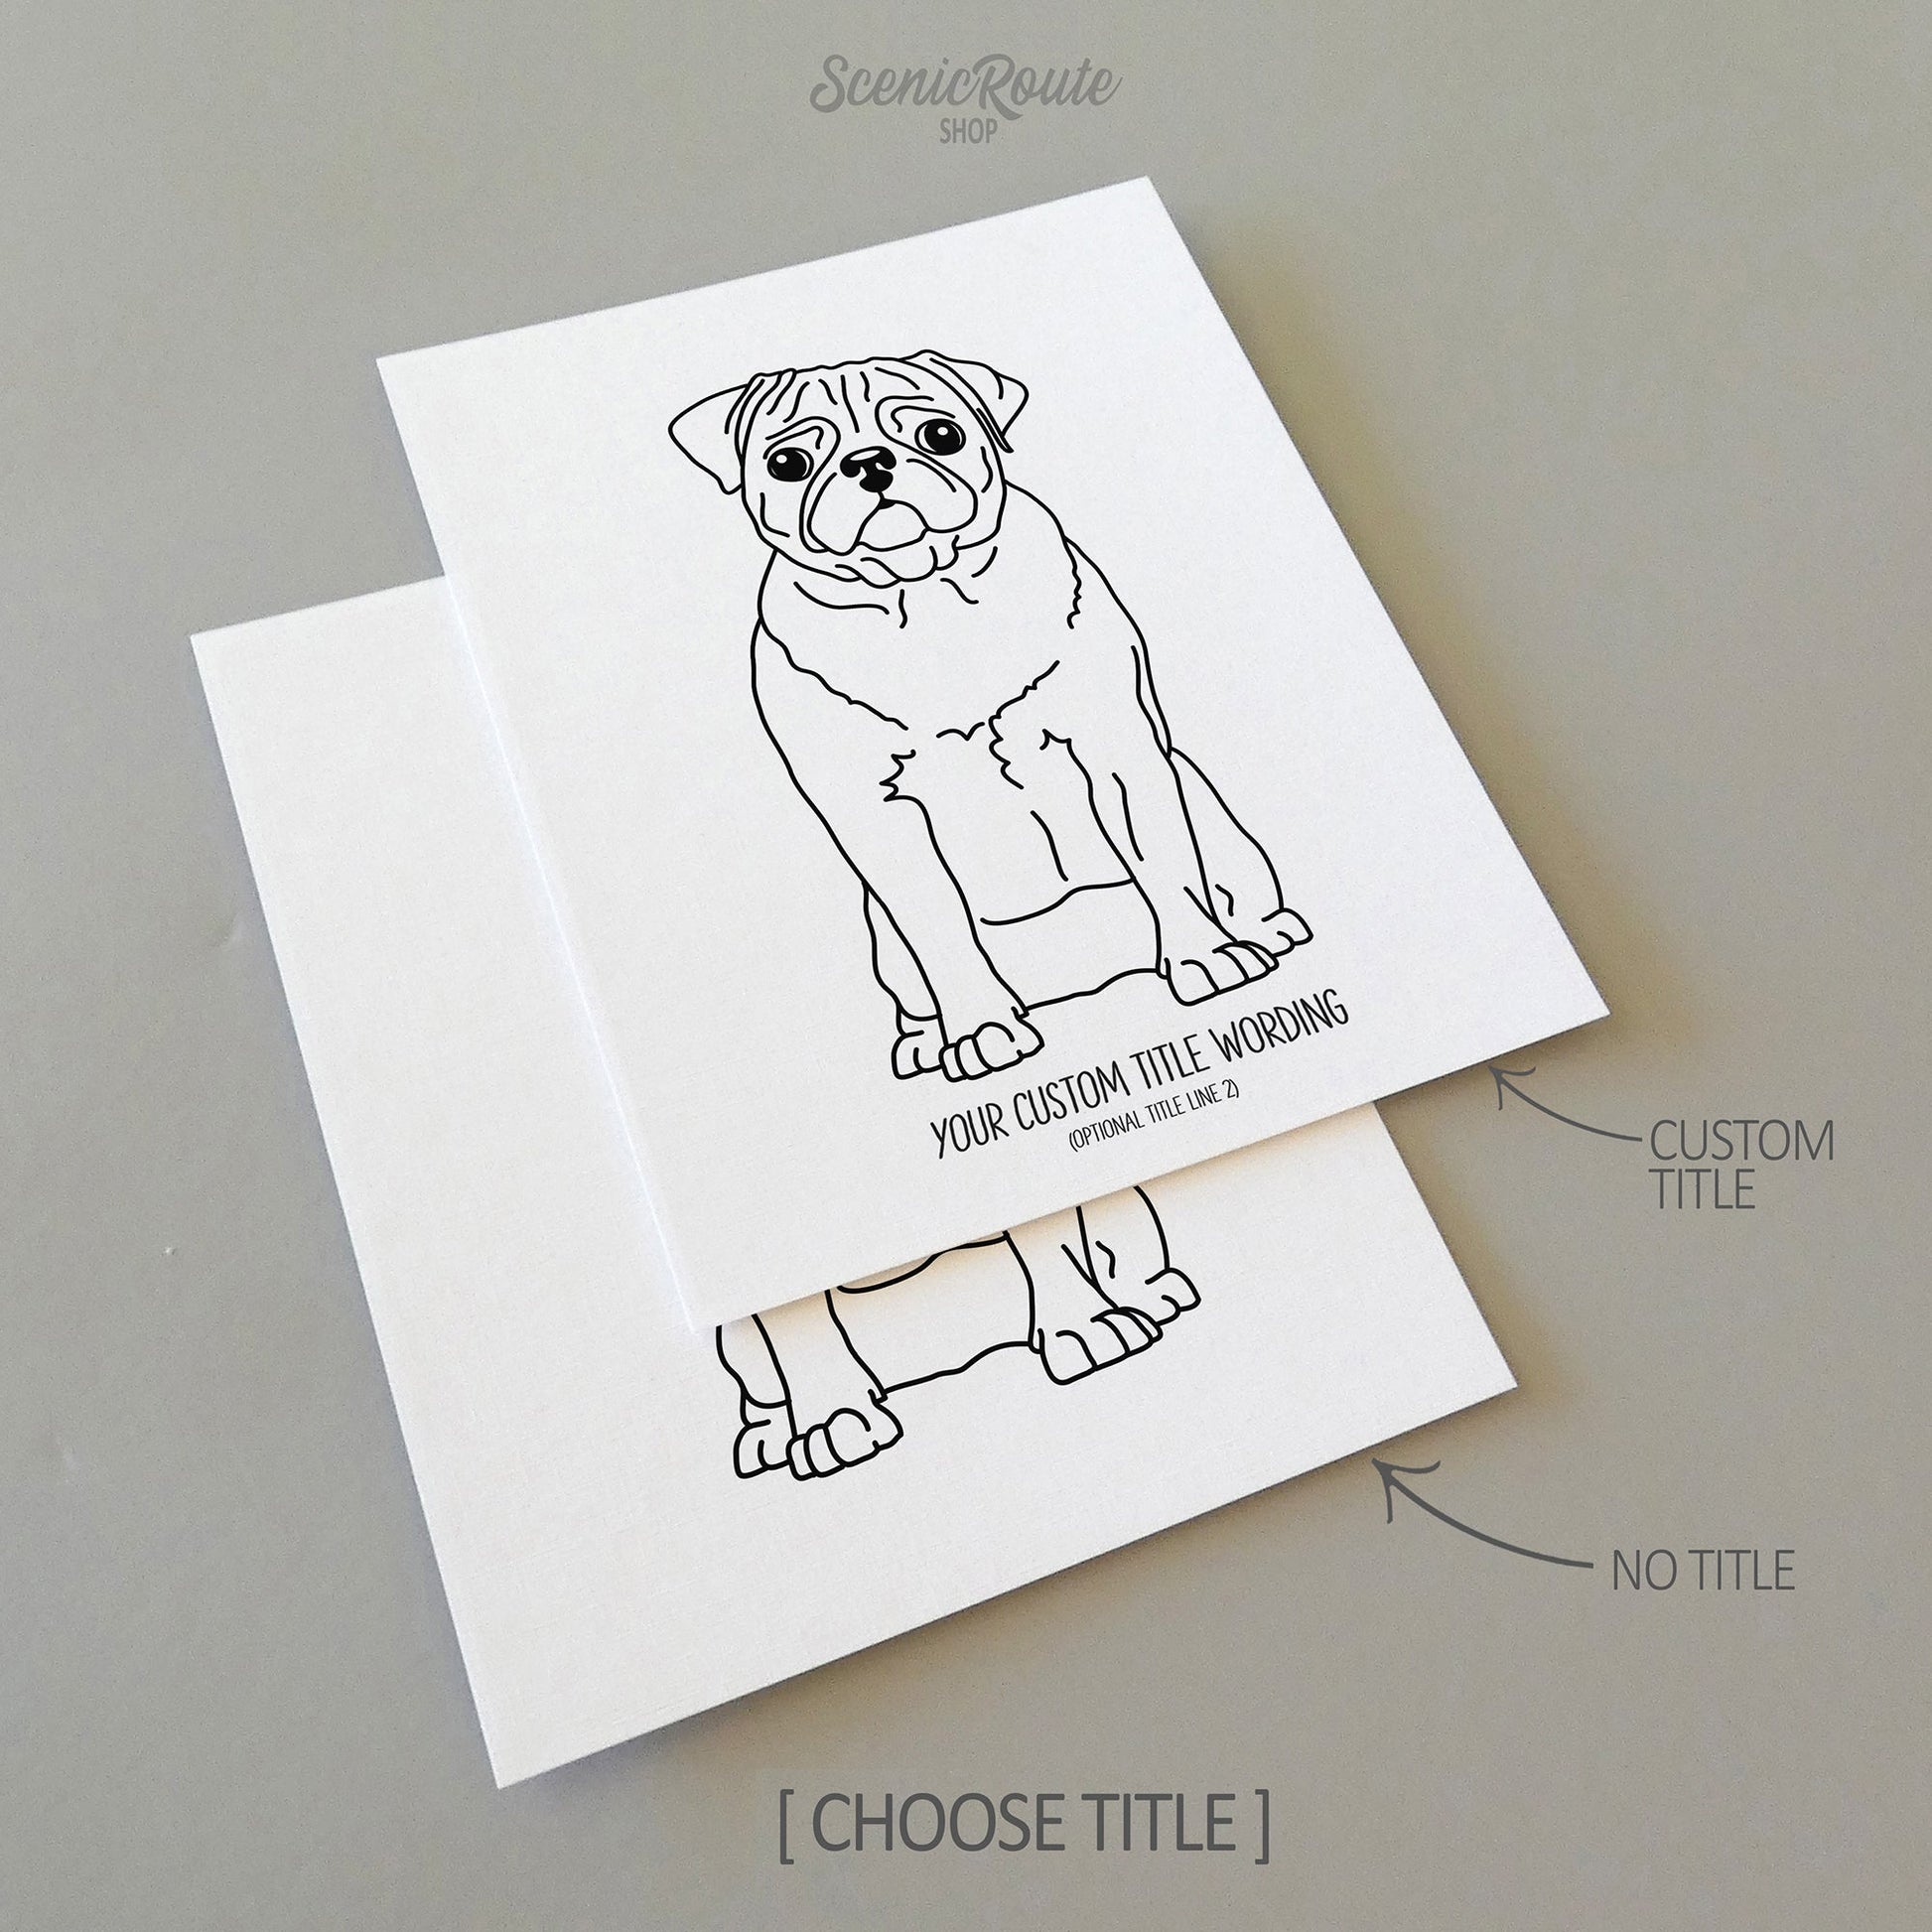 Two line art drawings of a Pug dog on white linen paper with a gray background.  The pieces are shown with “No Title” and “Custom Title” options for the available art print options.